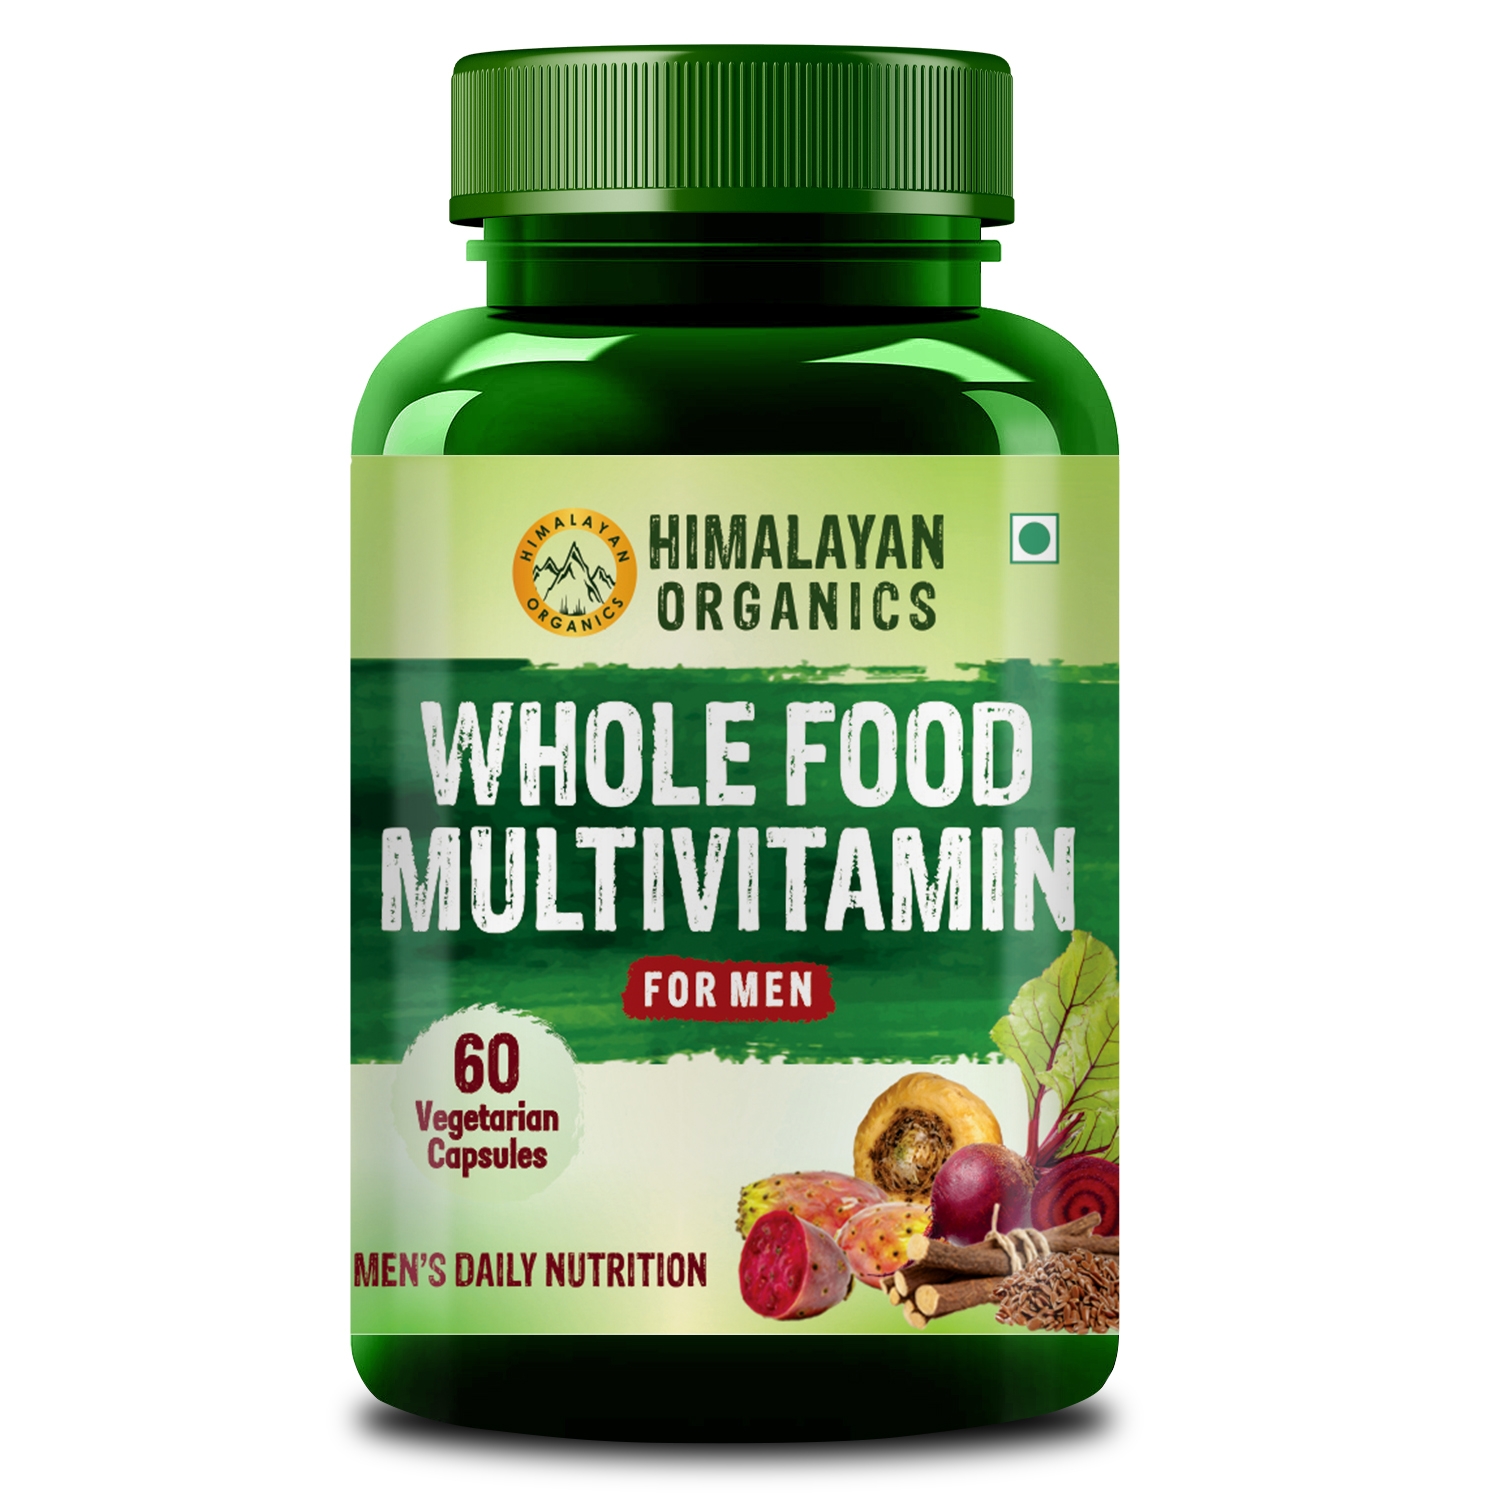 Himalayan Organics | Himalayan Organics Whole Food Multivitamin for Men || With Natural Vitamins, Minerals, Extracts || Best for Energy, Brain, Heart Health & Eye Health || 60 Veg Capsules 0